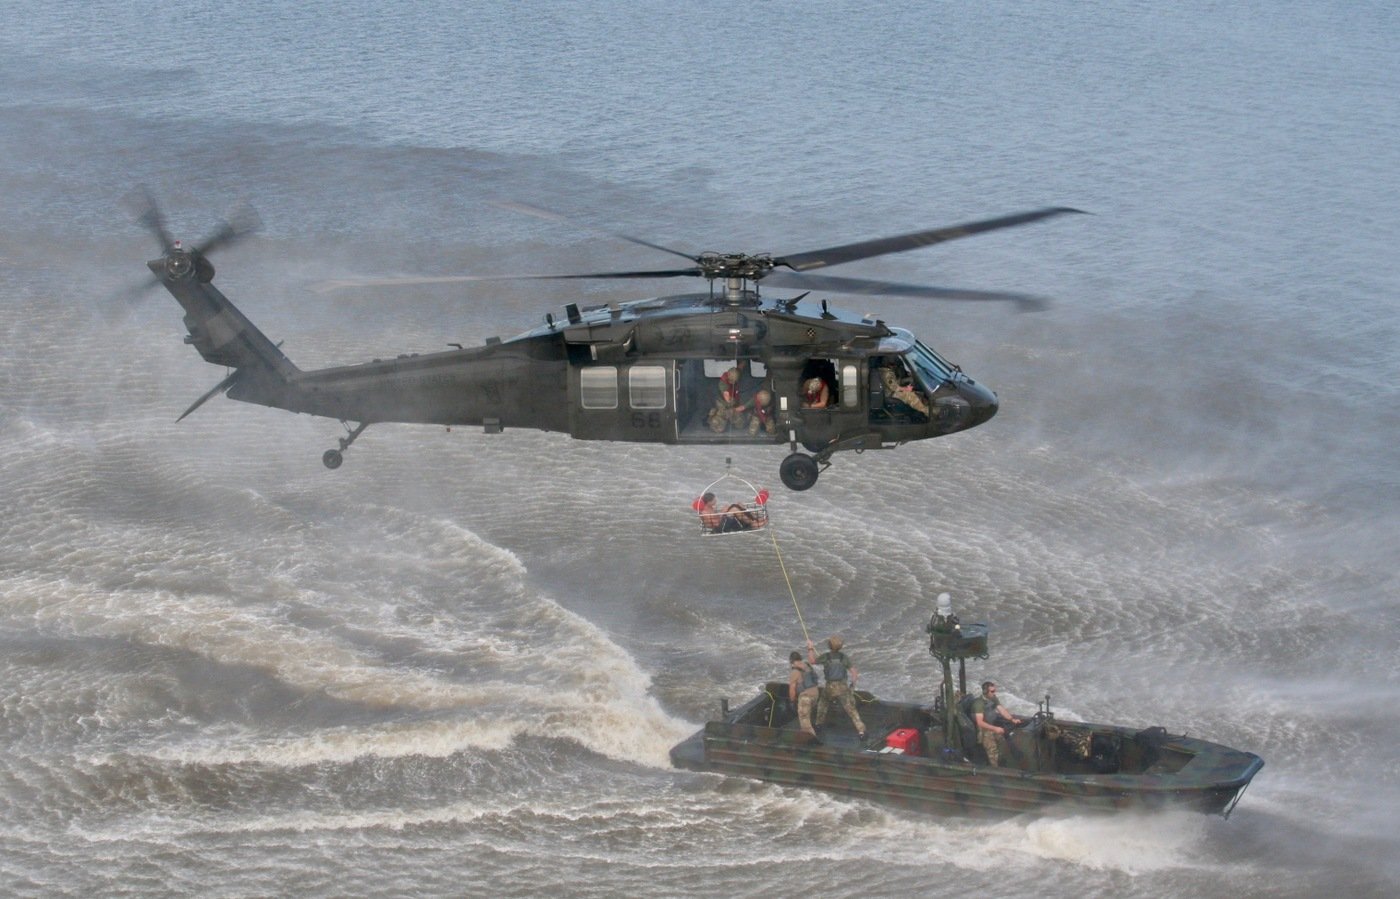 HRT Mobility Team trainees help life an “injured” boater into a helicopter during a Hostage Rescue Team (HRT) training exercise held August 5-7, 2019, in Charleston, South Carolina.